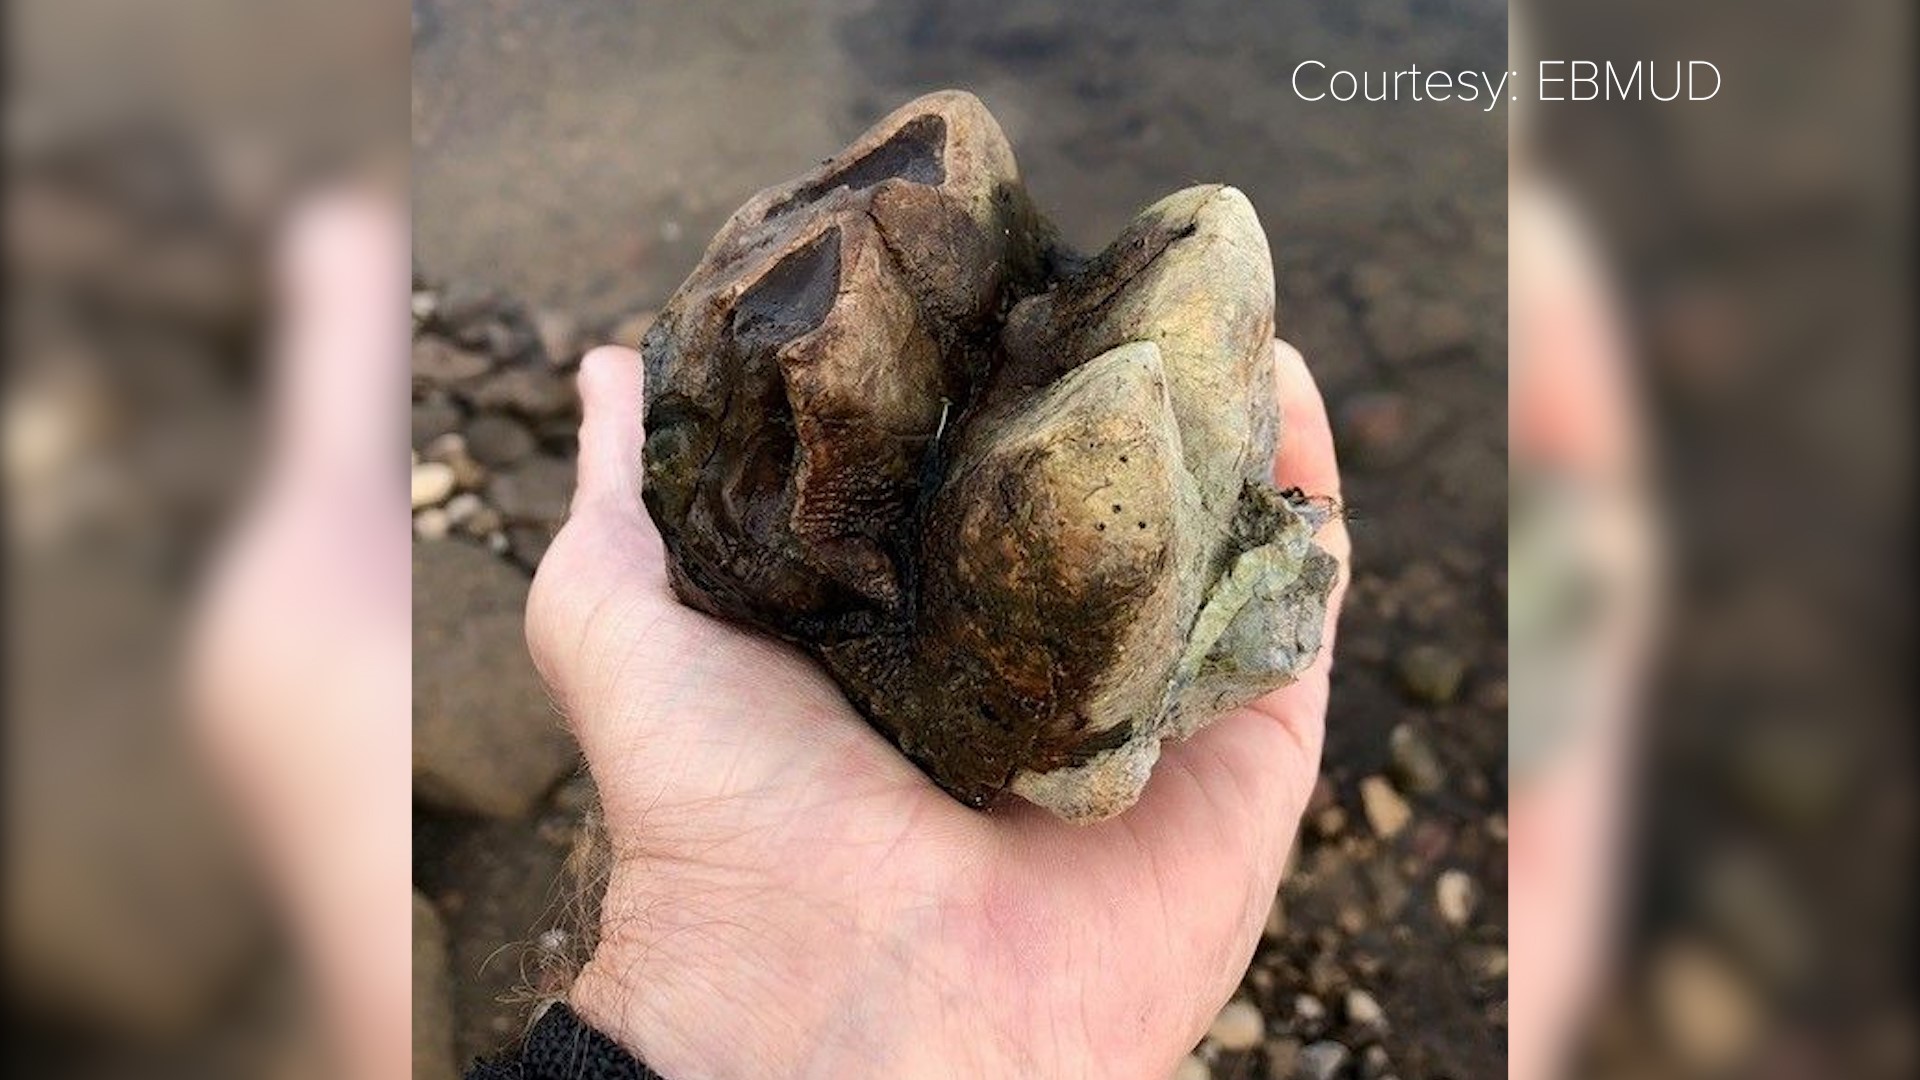 “This is the densest find of vertebrates in California since the La Brea Tar Pits,” explained Professor Todd Greene.